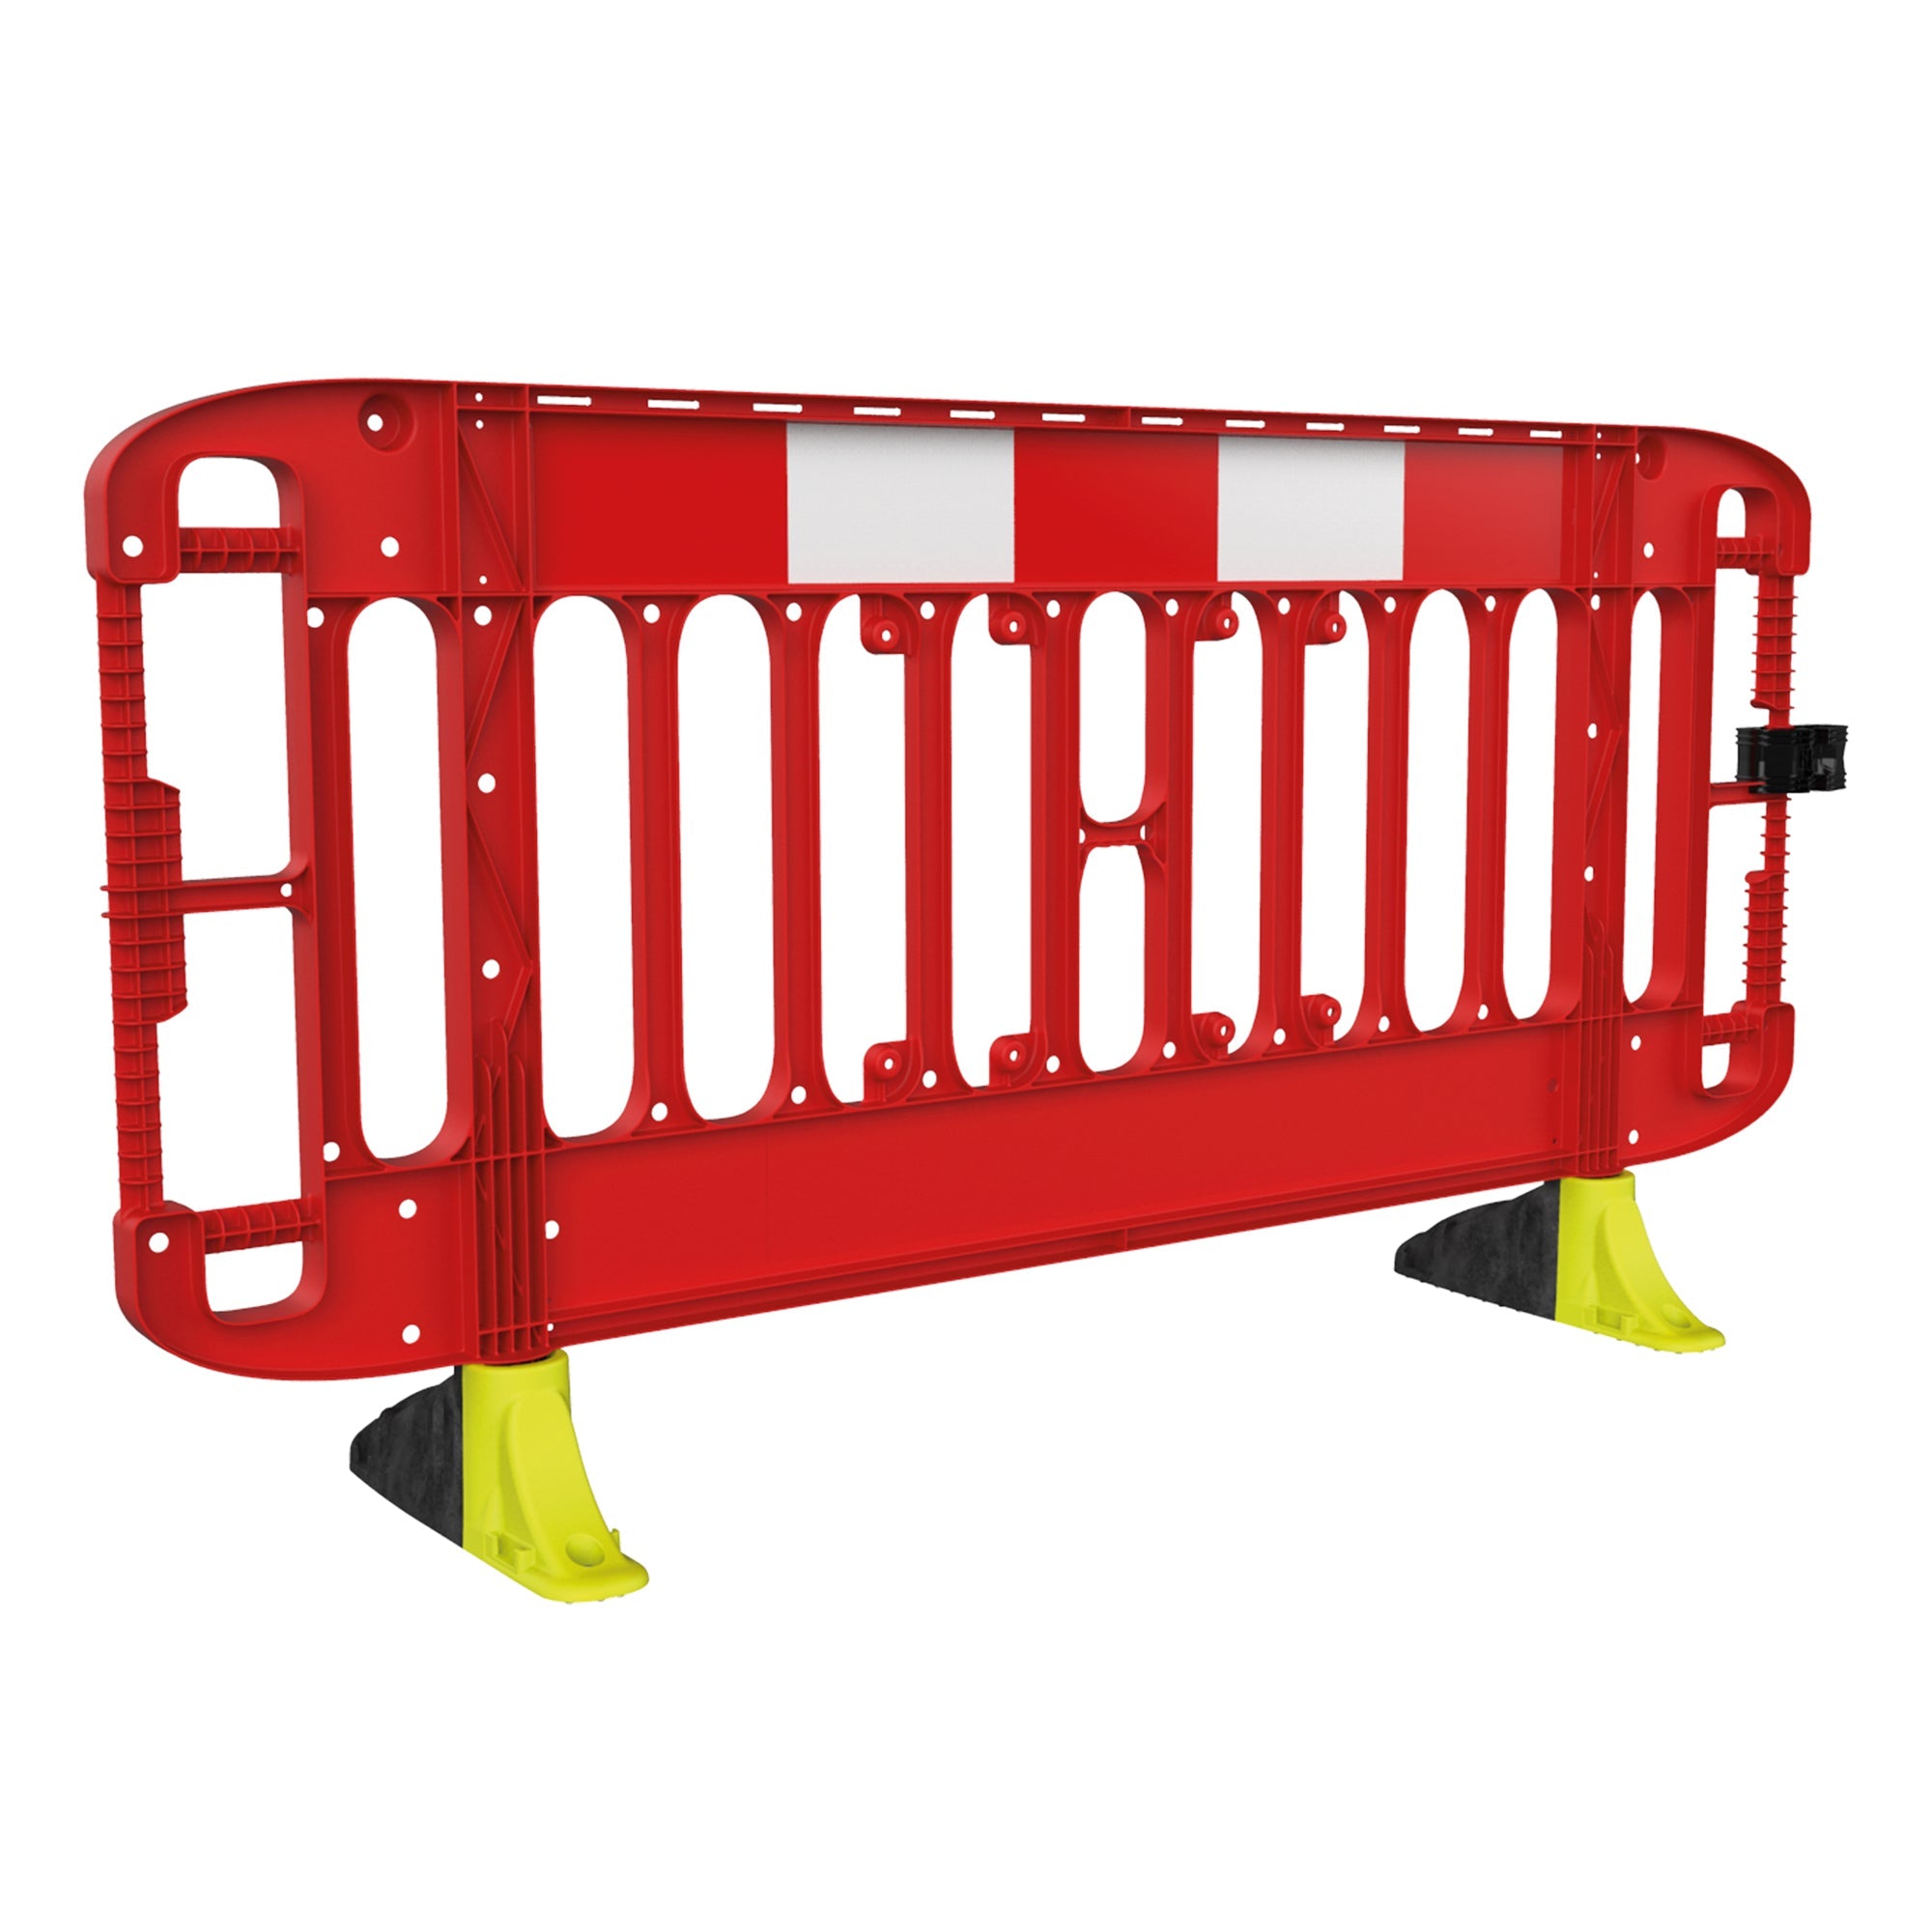 JSP Titan® 2m Injection Moulded Road Traffic Barrier with Yellow Anti